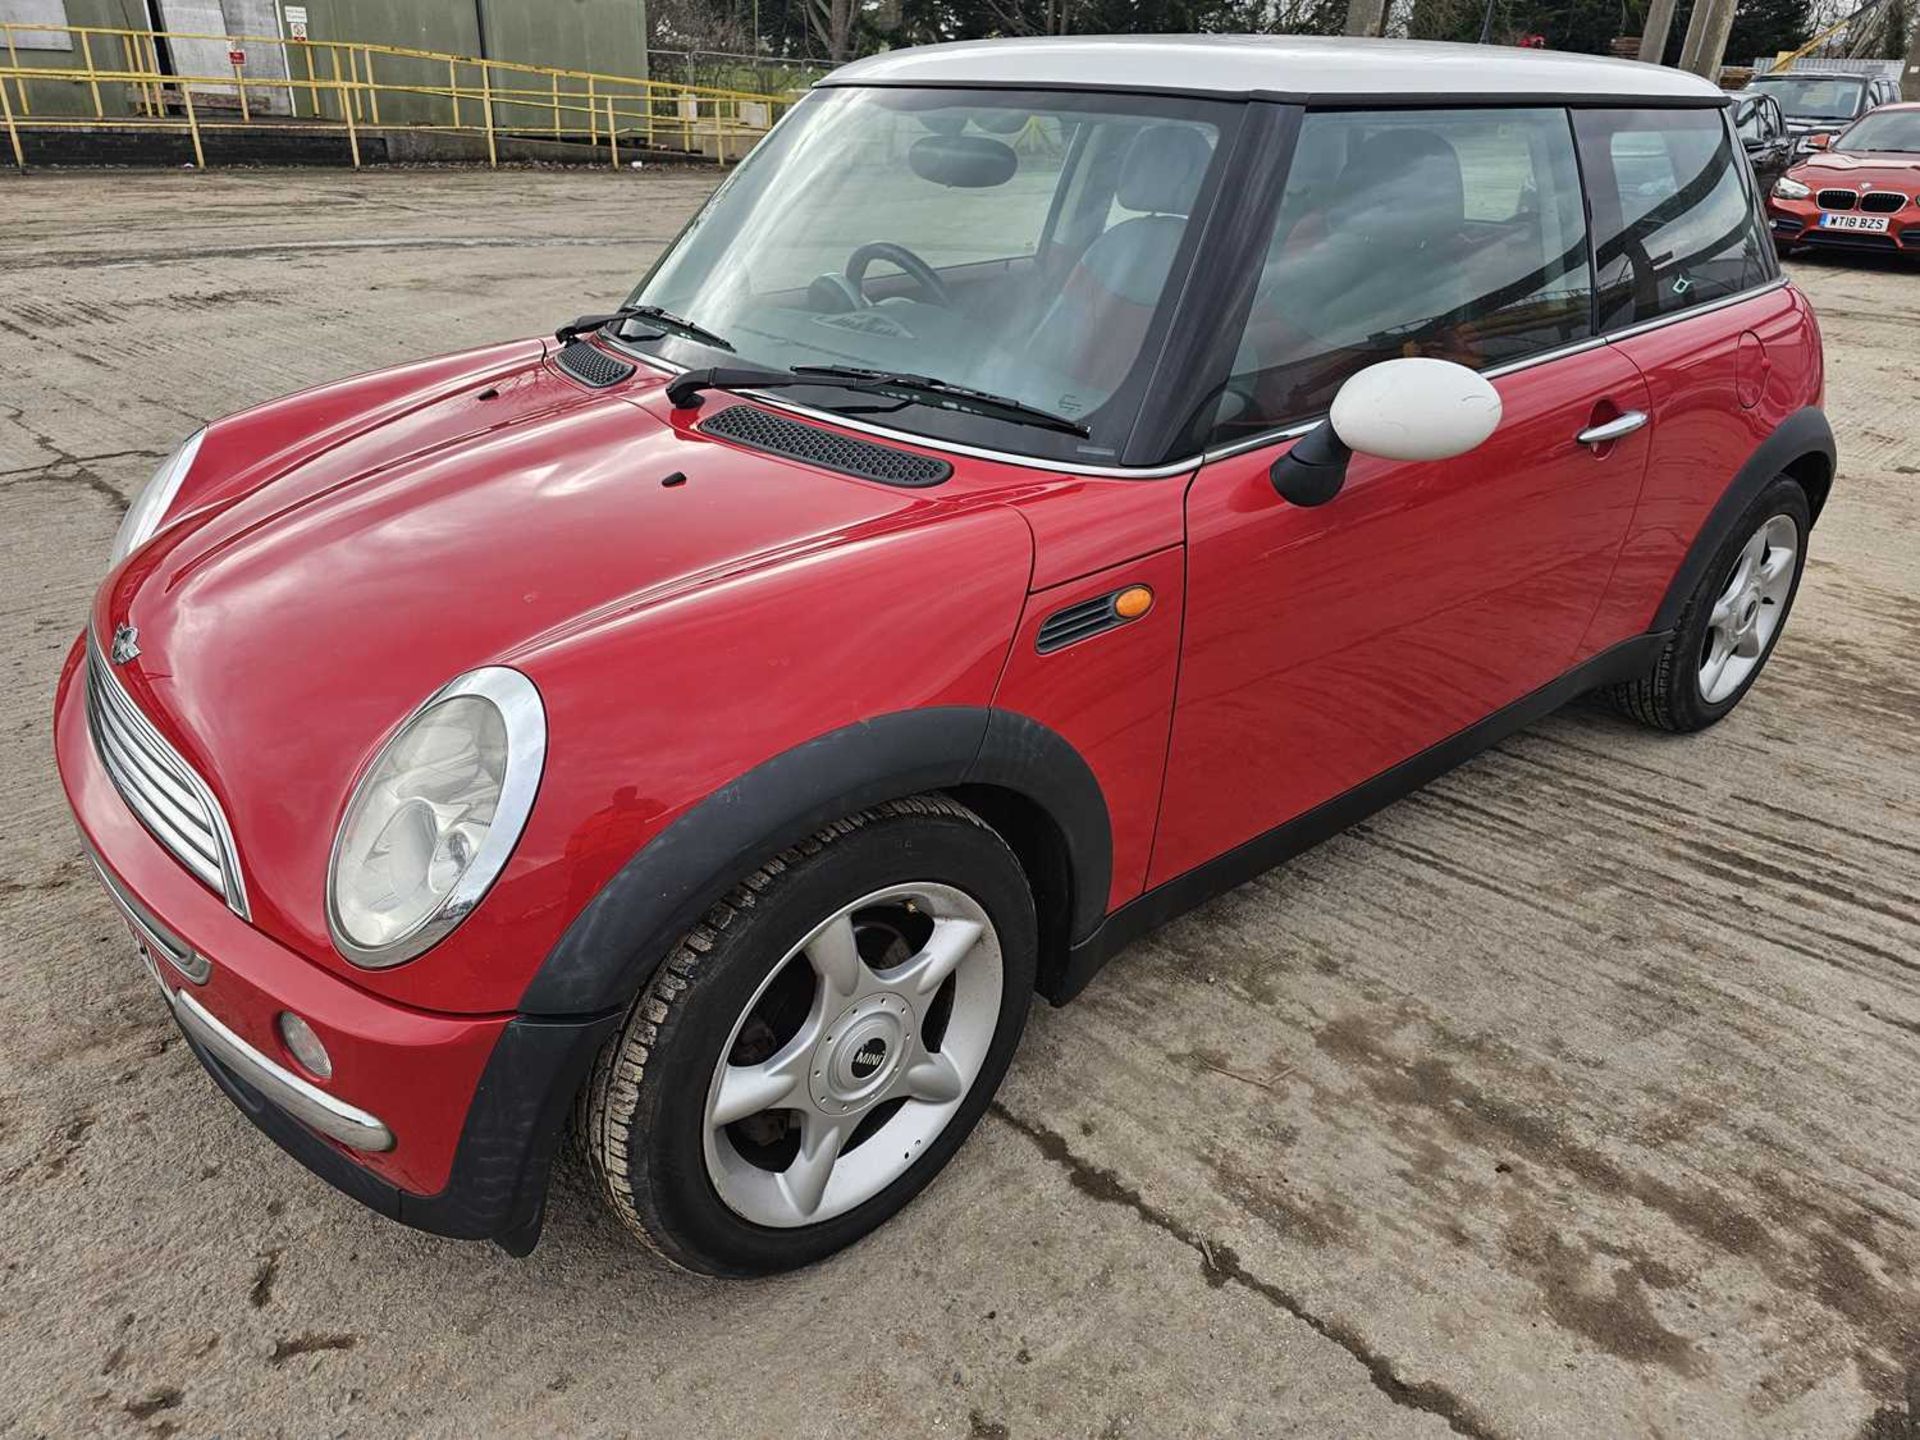 2004 Mini Cooper, 5 Speed, Half Leather, Heated Seats, A/C (Reg. Docs. & Service History Available, 